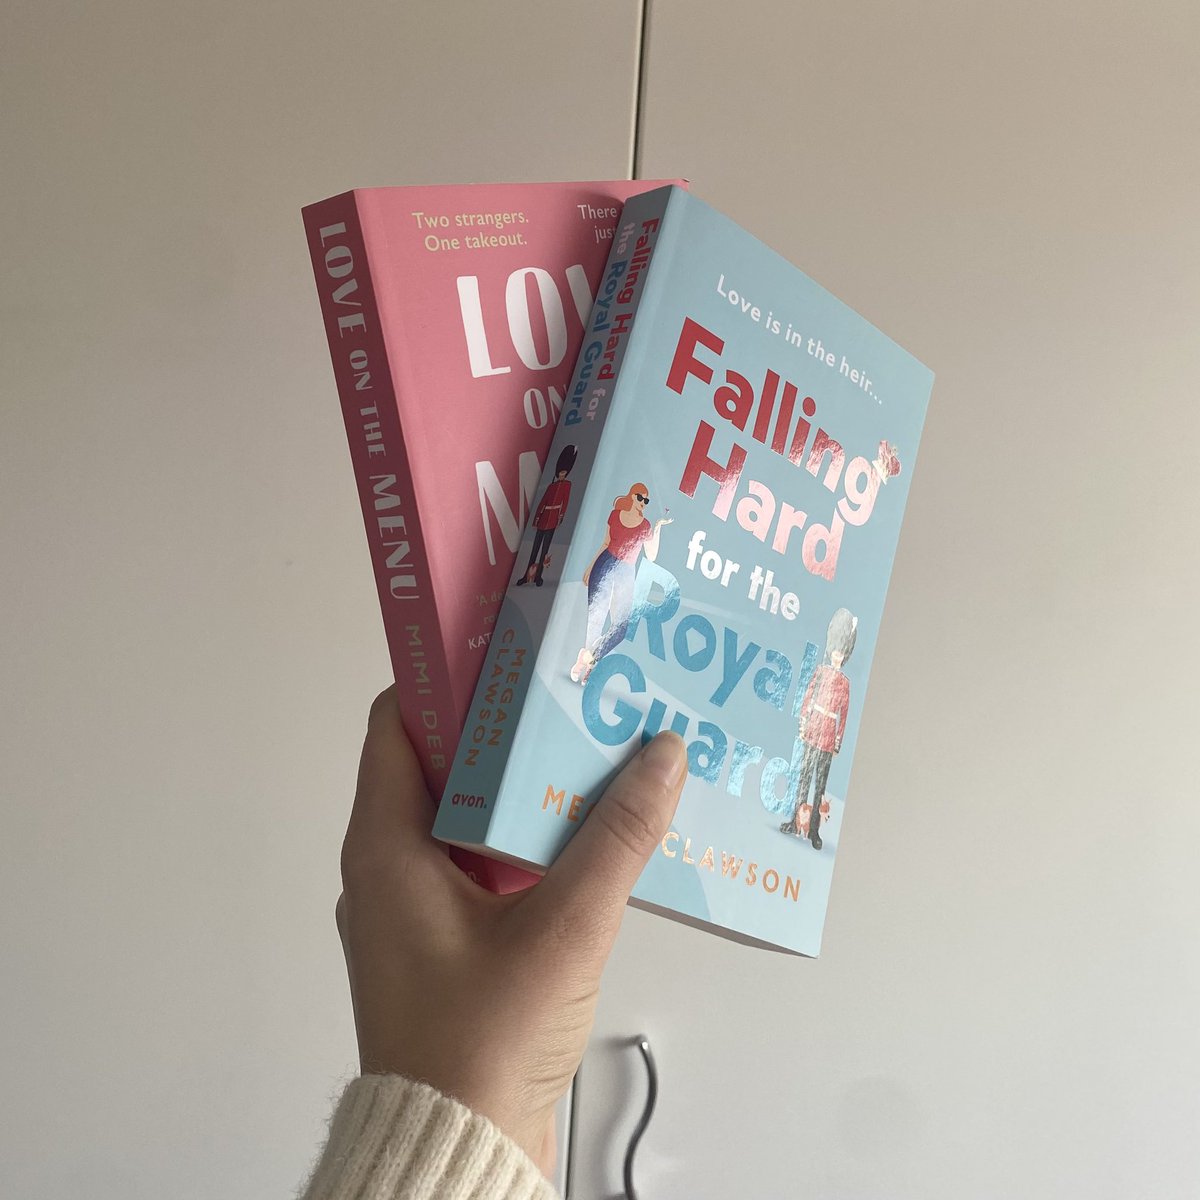 We’ll never take for granted the generosity of publishers 🥺 thank you so much @AvonBooksUK for sending us Falling hard for the royal guard by @meganambxr 💂🏻‍♂️& Love on the menu by @IDwrites 🥡 two delicious #romcoms we can’t wait to eat up!